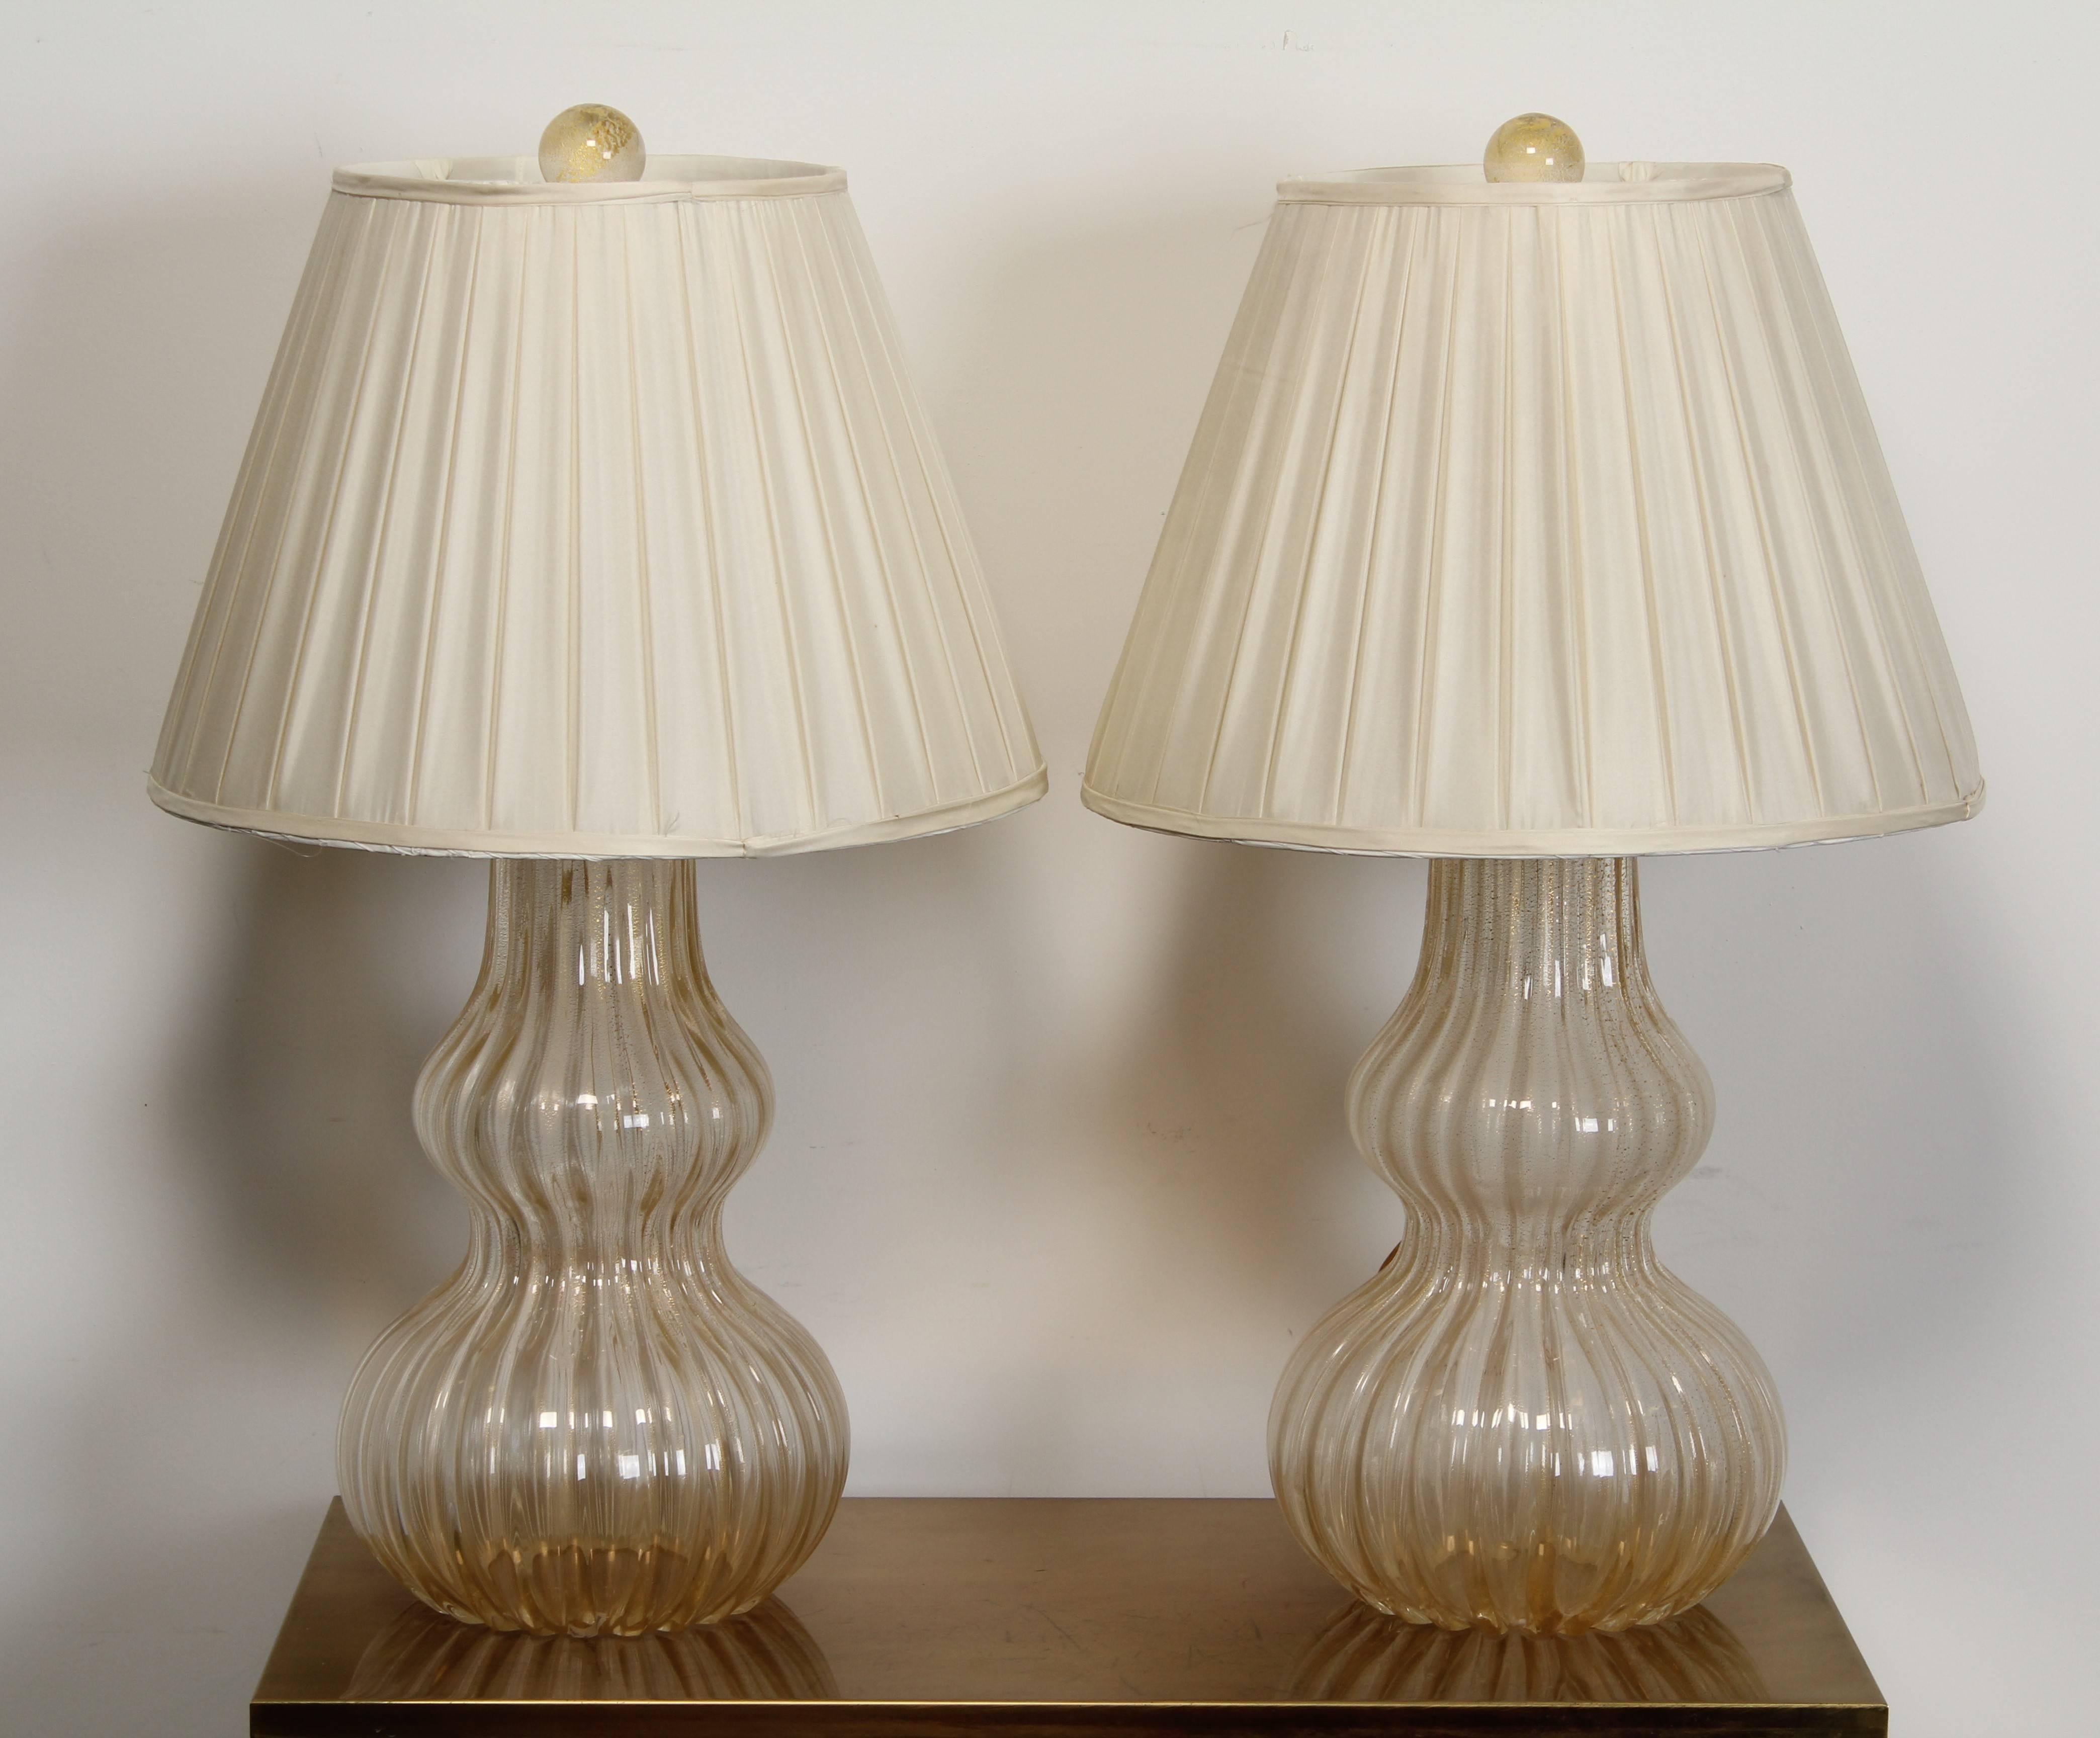 An elegant pair of Murano glass table lamps, 1980. The lamps have gold flecking to surface with round glass finials. Shades included.